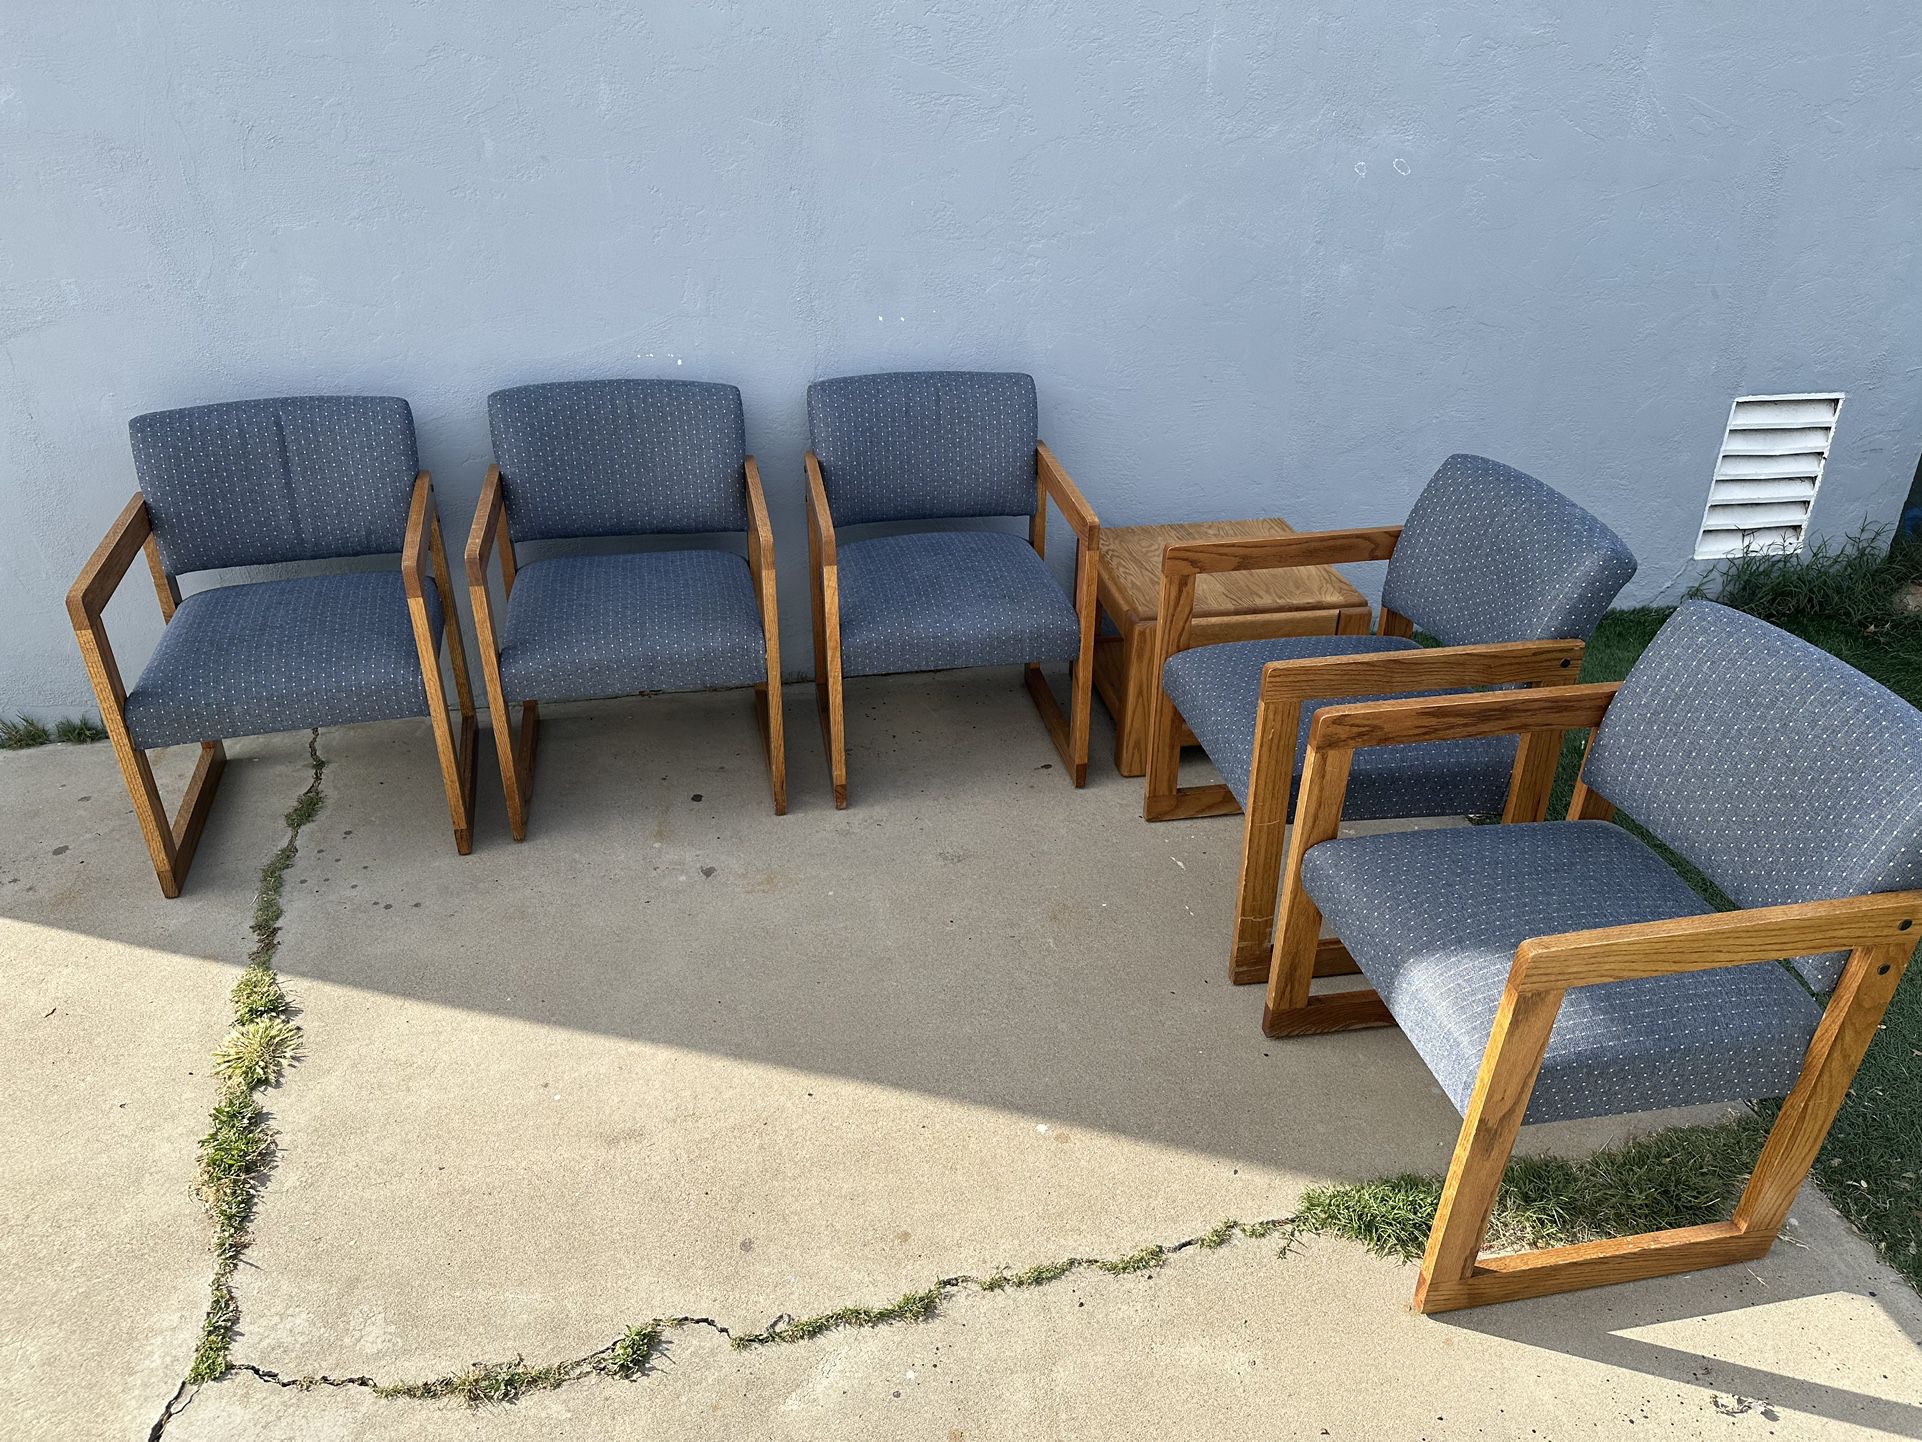 Wooden Office Chairs (x5) and End Table for School, Church, Reception, Waiting Room